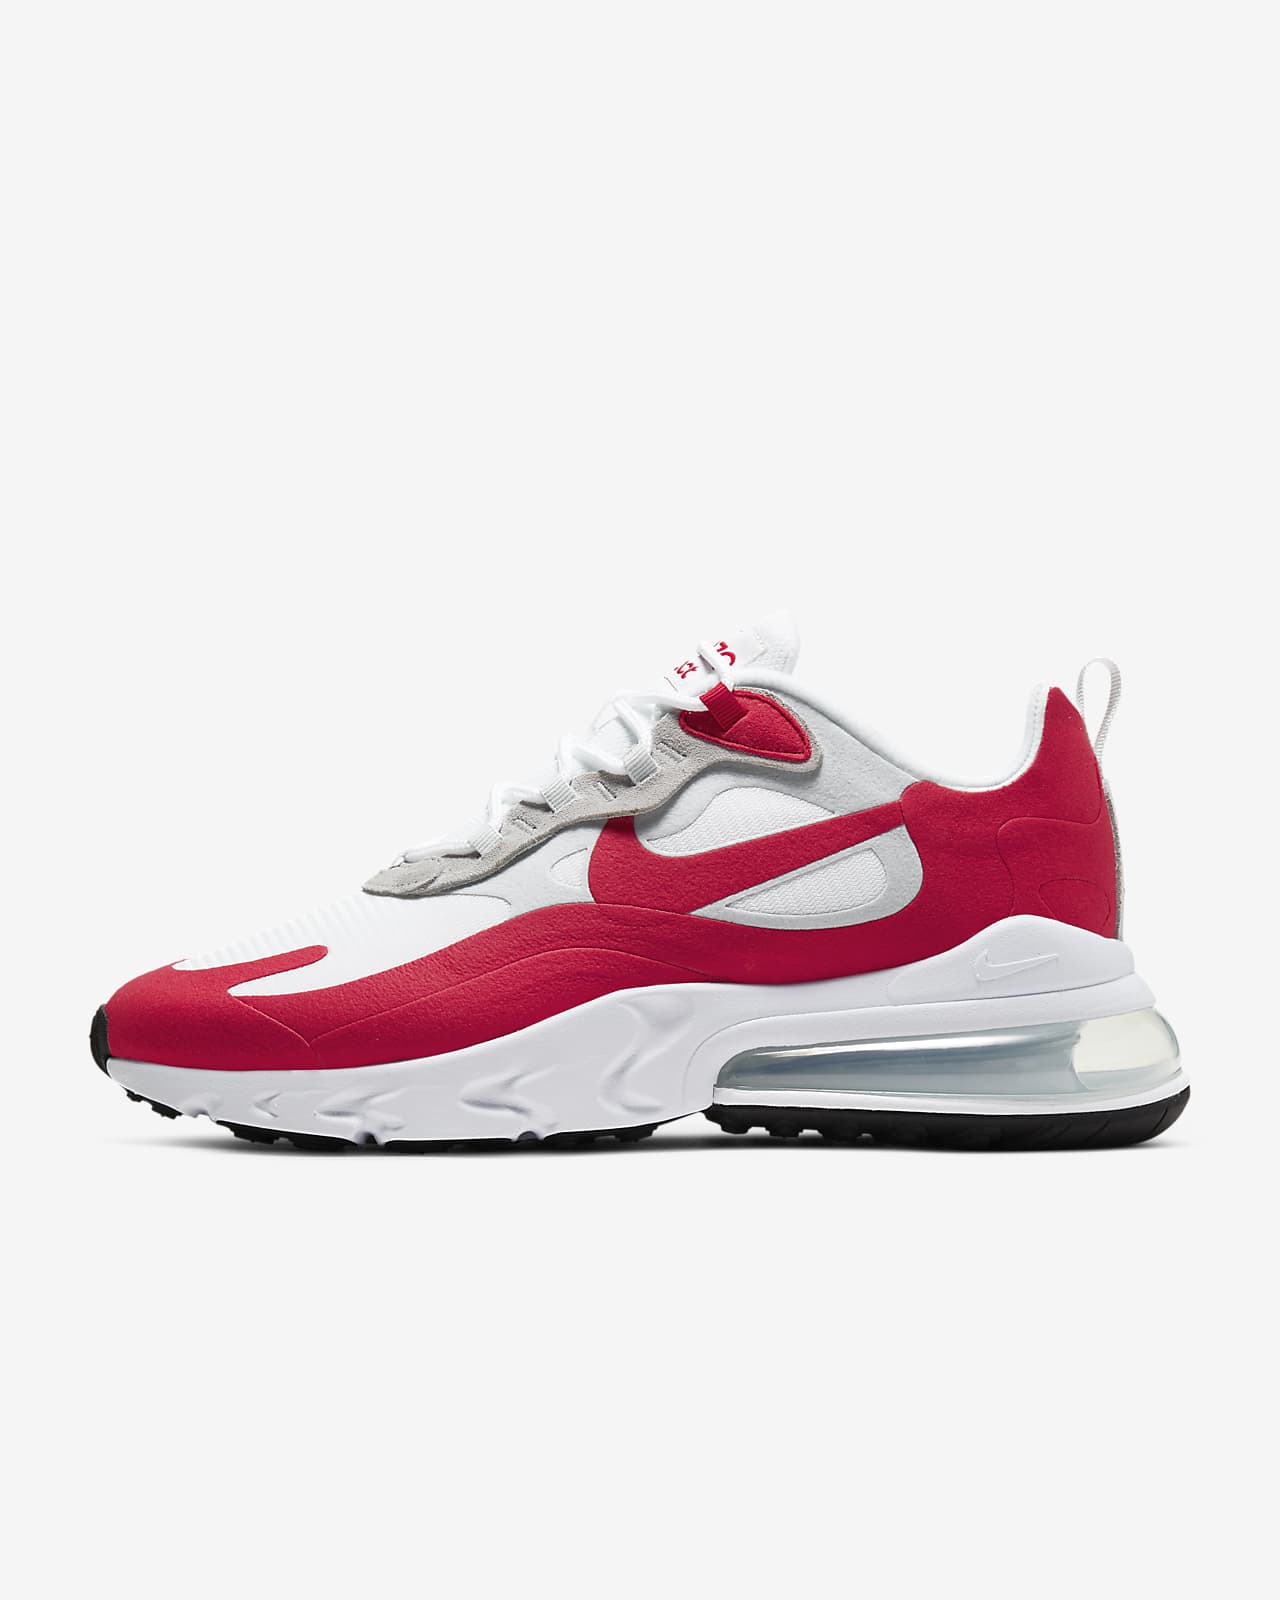 mens red and white nike shoes